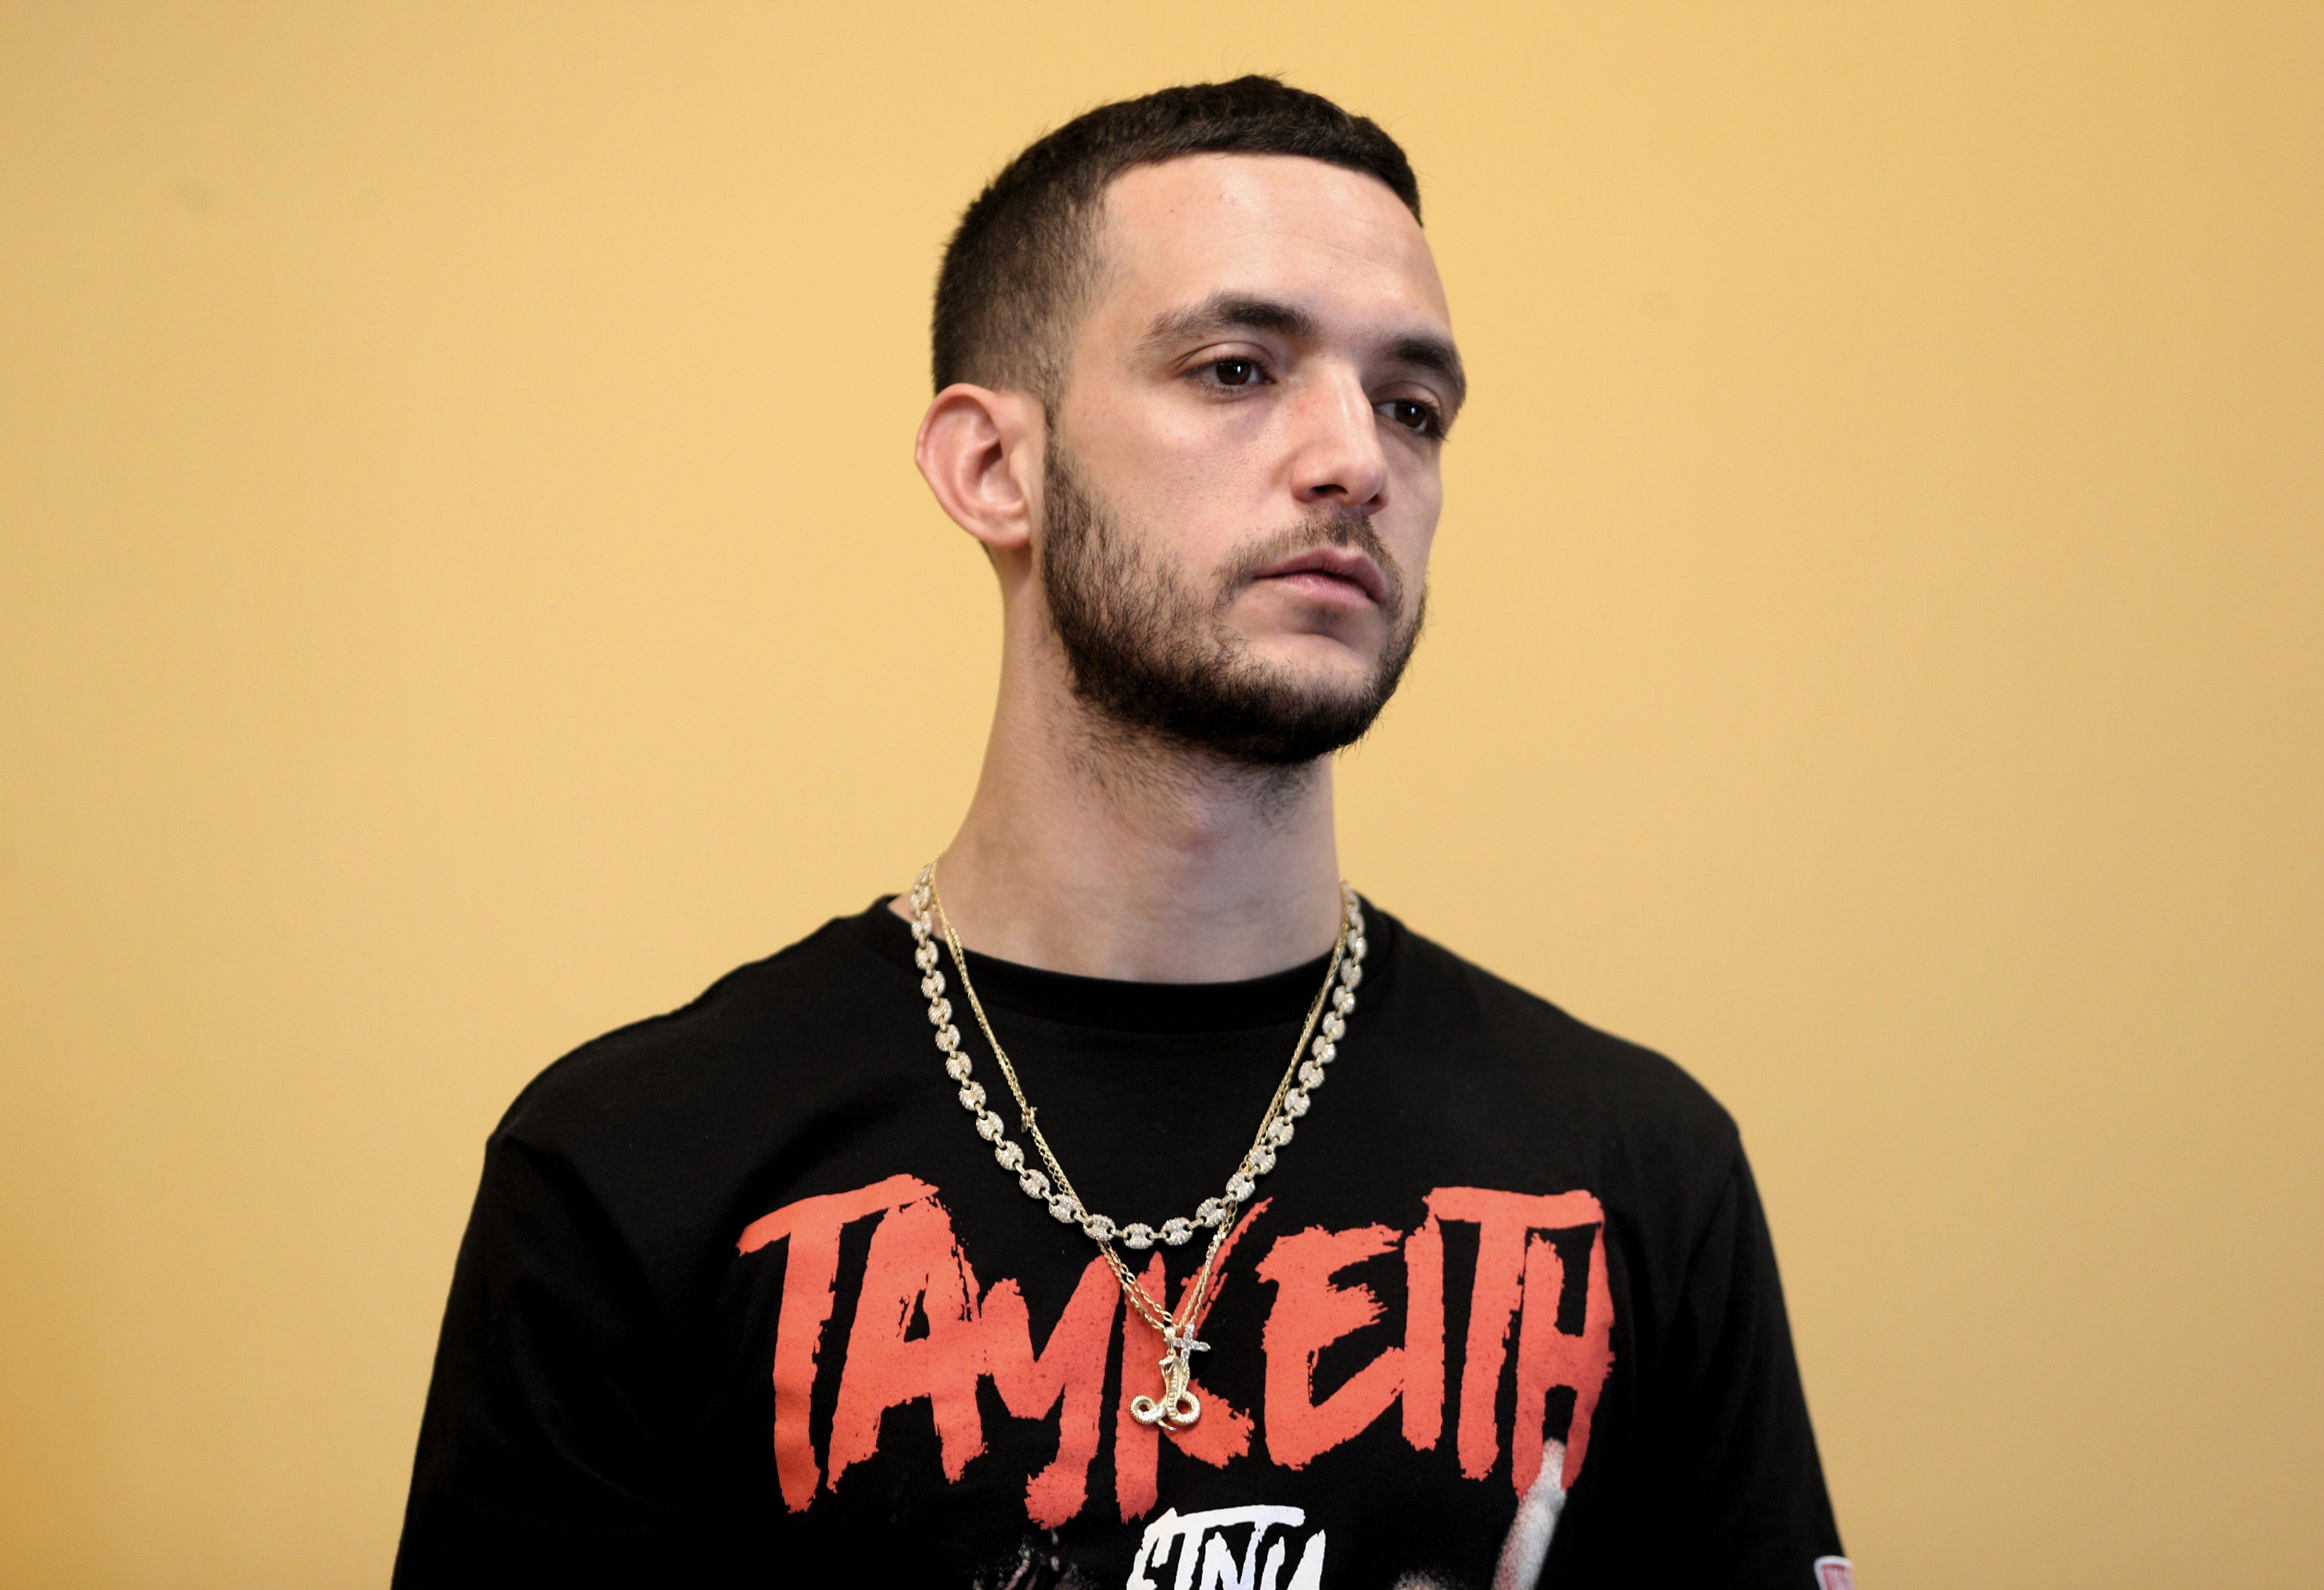 https://hips.hearstapps.com/hmg-prod/images/the-trap-singer-and-rapper-c-tangana-is-seen-during-the-news-photo-1582289842.jpg